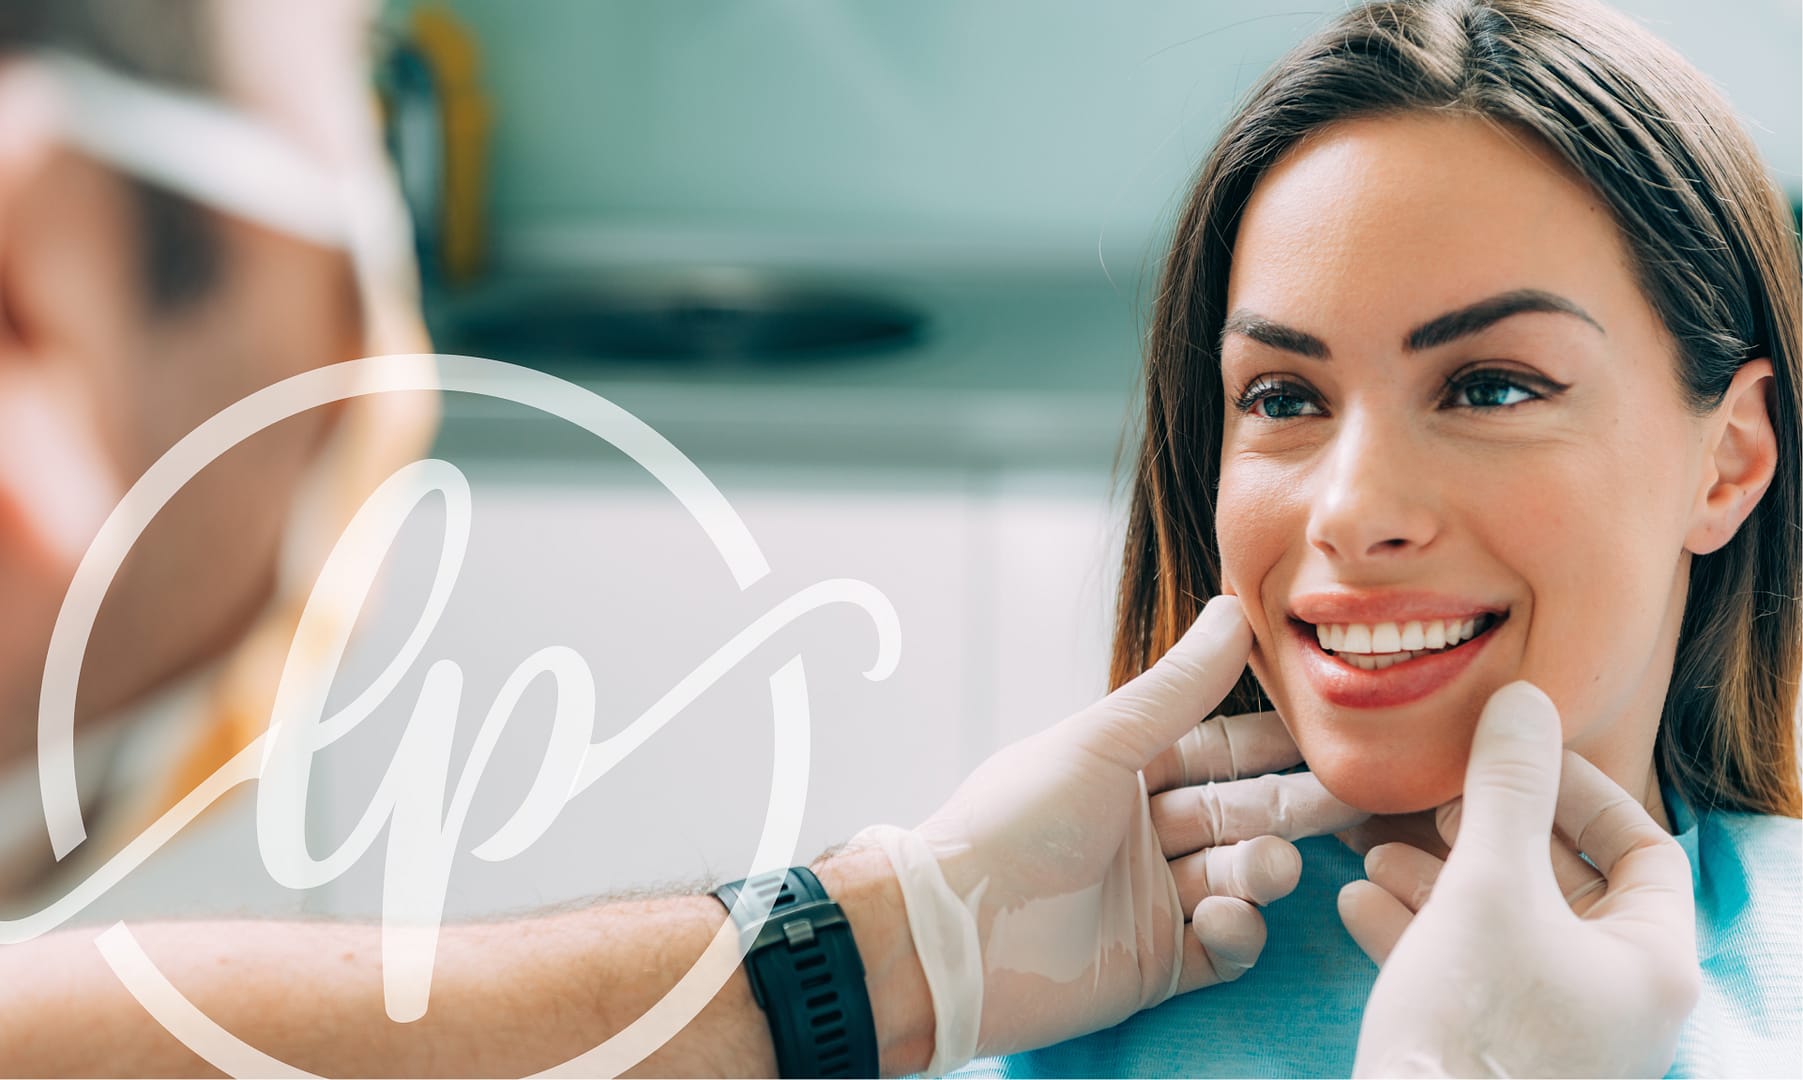 Transform your smile with cosmetic dentistry.